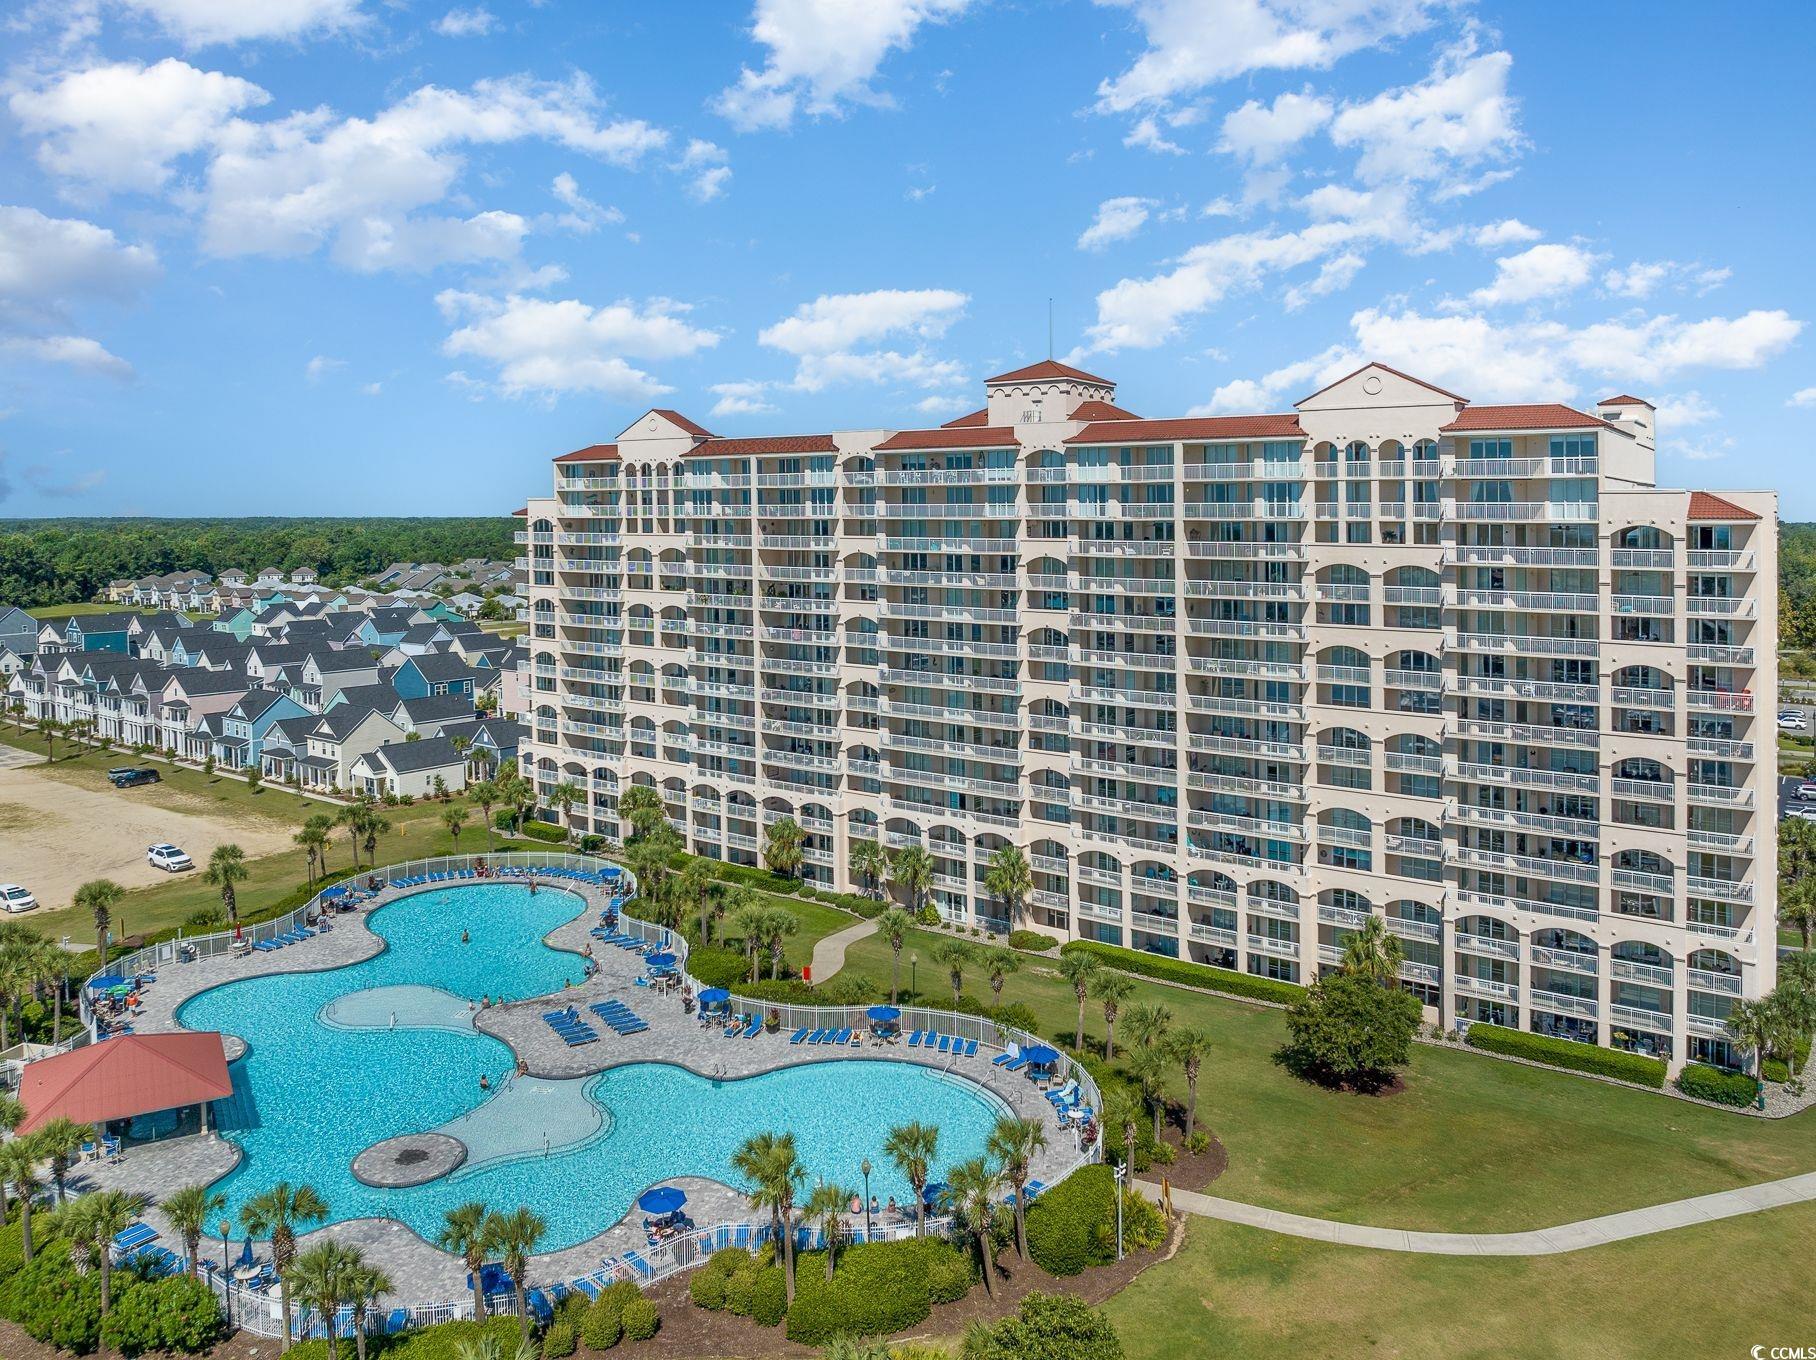 experience coastal luxury and resort-style living at its finest in this immaculate 4-bedroom, 3-bathroom end unit condo, nestled within the prestigious north tower of barefoot resort in north myrtle beach, sc. with captivating views of both the breathtaking intercoastal waterway and a distant glimpse of the sparkling ocean, this property offers an unparalleled combination of natural beauty and modern comfort. step into a world of sophistication as you enter this fully furnished gem. every detail has been carefully considered, ensuring a seamless blend of elegance and functionality. the interior has been thoughtfully updated, boasting fresh paint that complements the abundance of natural light that streams through the expansive windows of this corner unit. the updated flooring lends an air of refinement while providing durability for easy coastal living. two private balconies offer outdoor havens for relaxation and soaking in the surrounding beauty. whether you're sipping your morning coffee or unwinding with a glass of wine in the evening, these spaces provide the perfect vantage point to appreciate the awe-inspiring sights. as a golfer's paradise, this condo is ideally situated on one of south carolina's premier golf courses, so don't miss out and book your showing today!